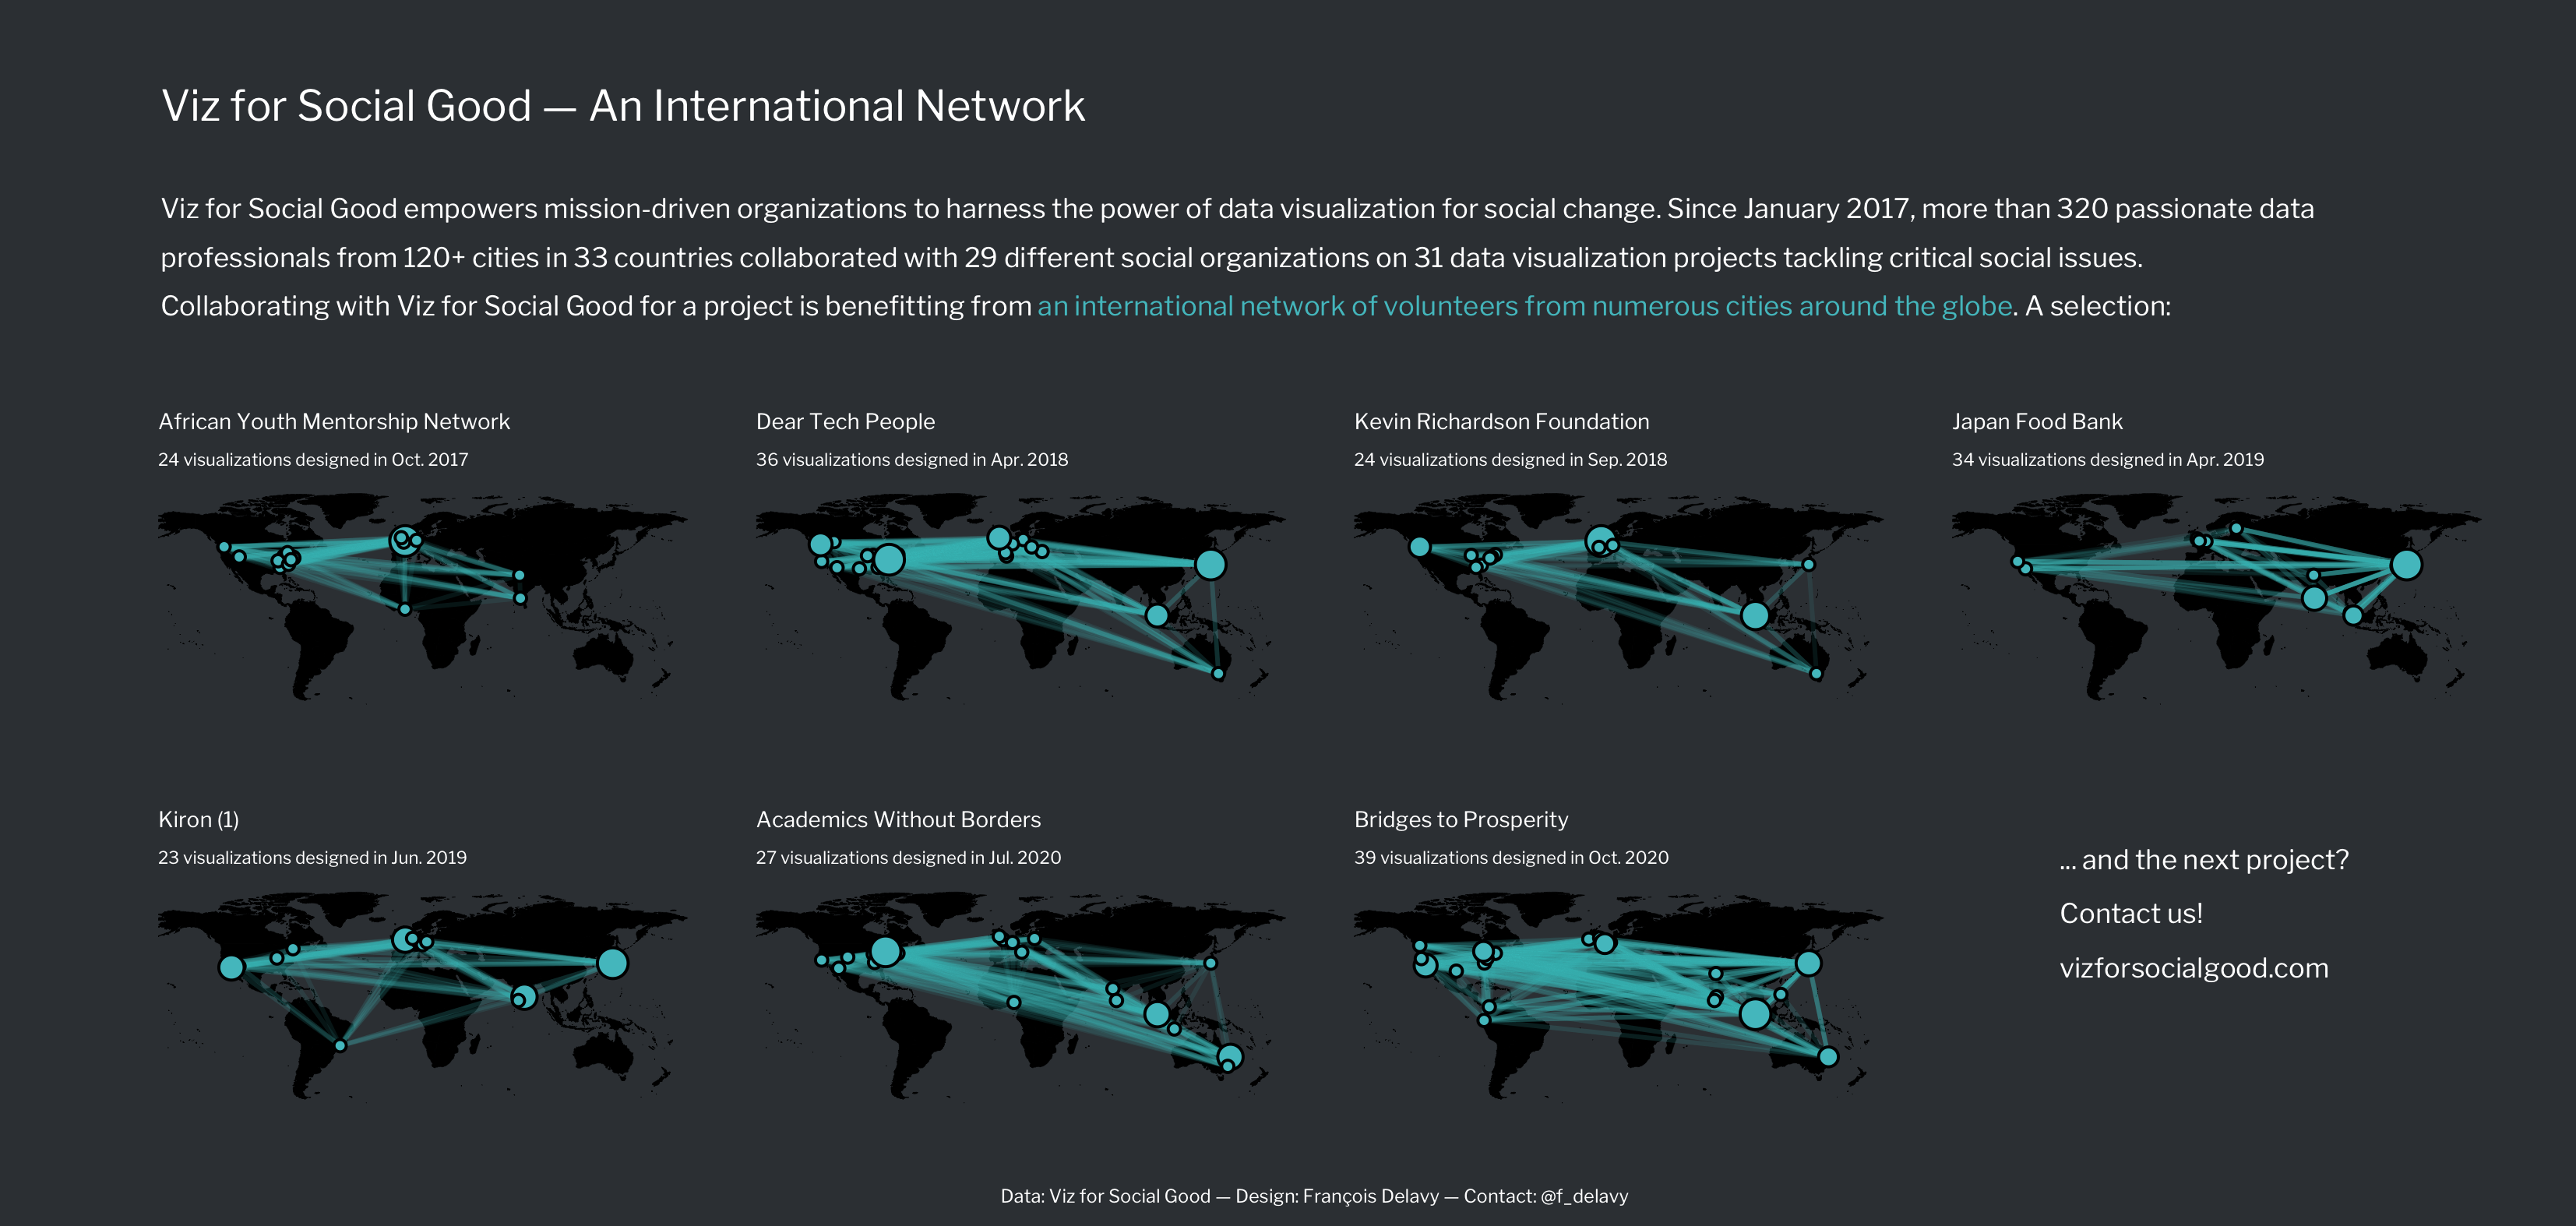 The international networks of volunteers formed for some Viz For Social Good projects.